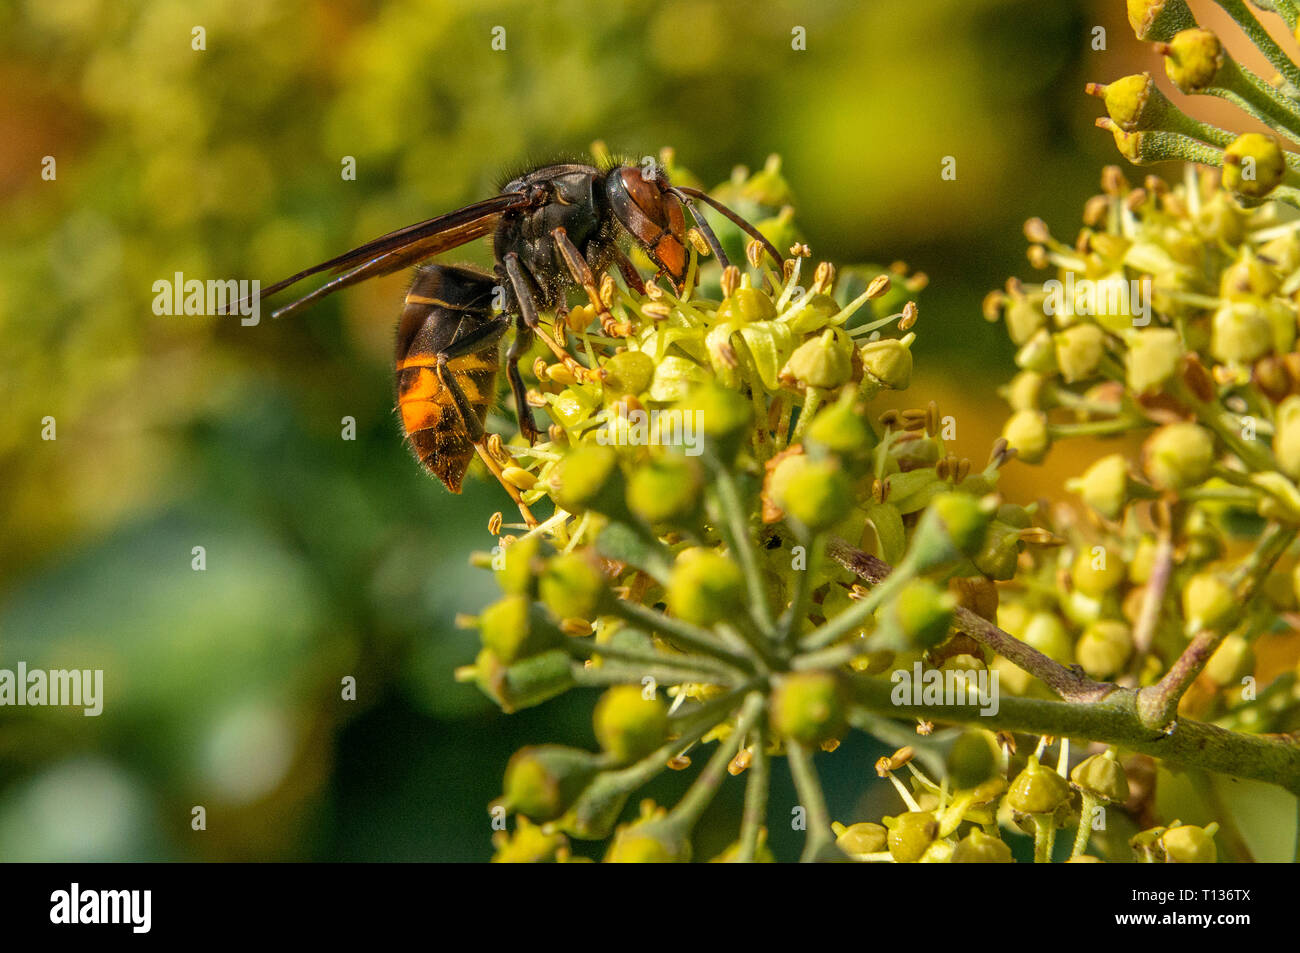 Close up of an Asian hornet, also known as the yellow-legged hornet (Vespa velutina) taking nectar from an Ivy flower head. The South of France. Stock Photo